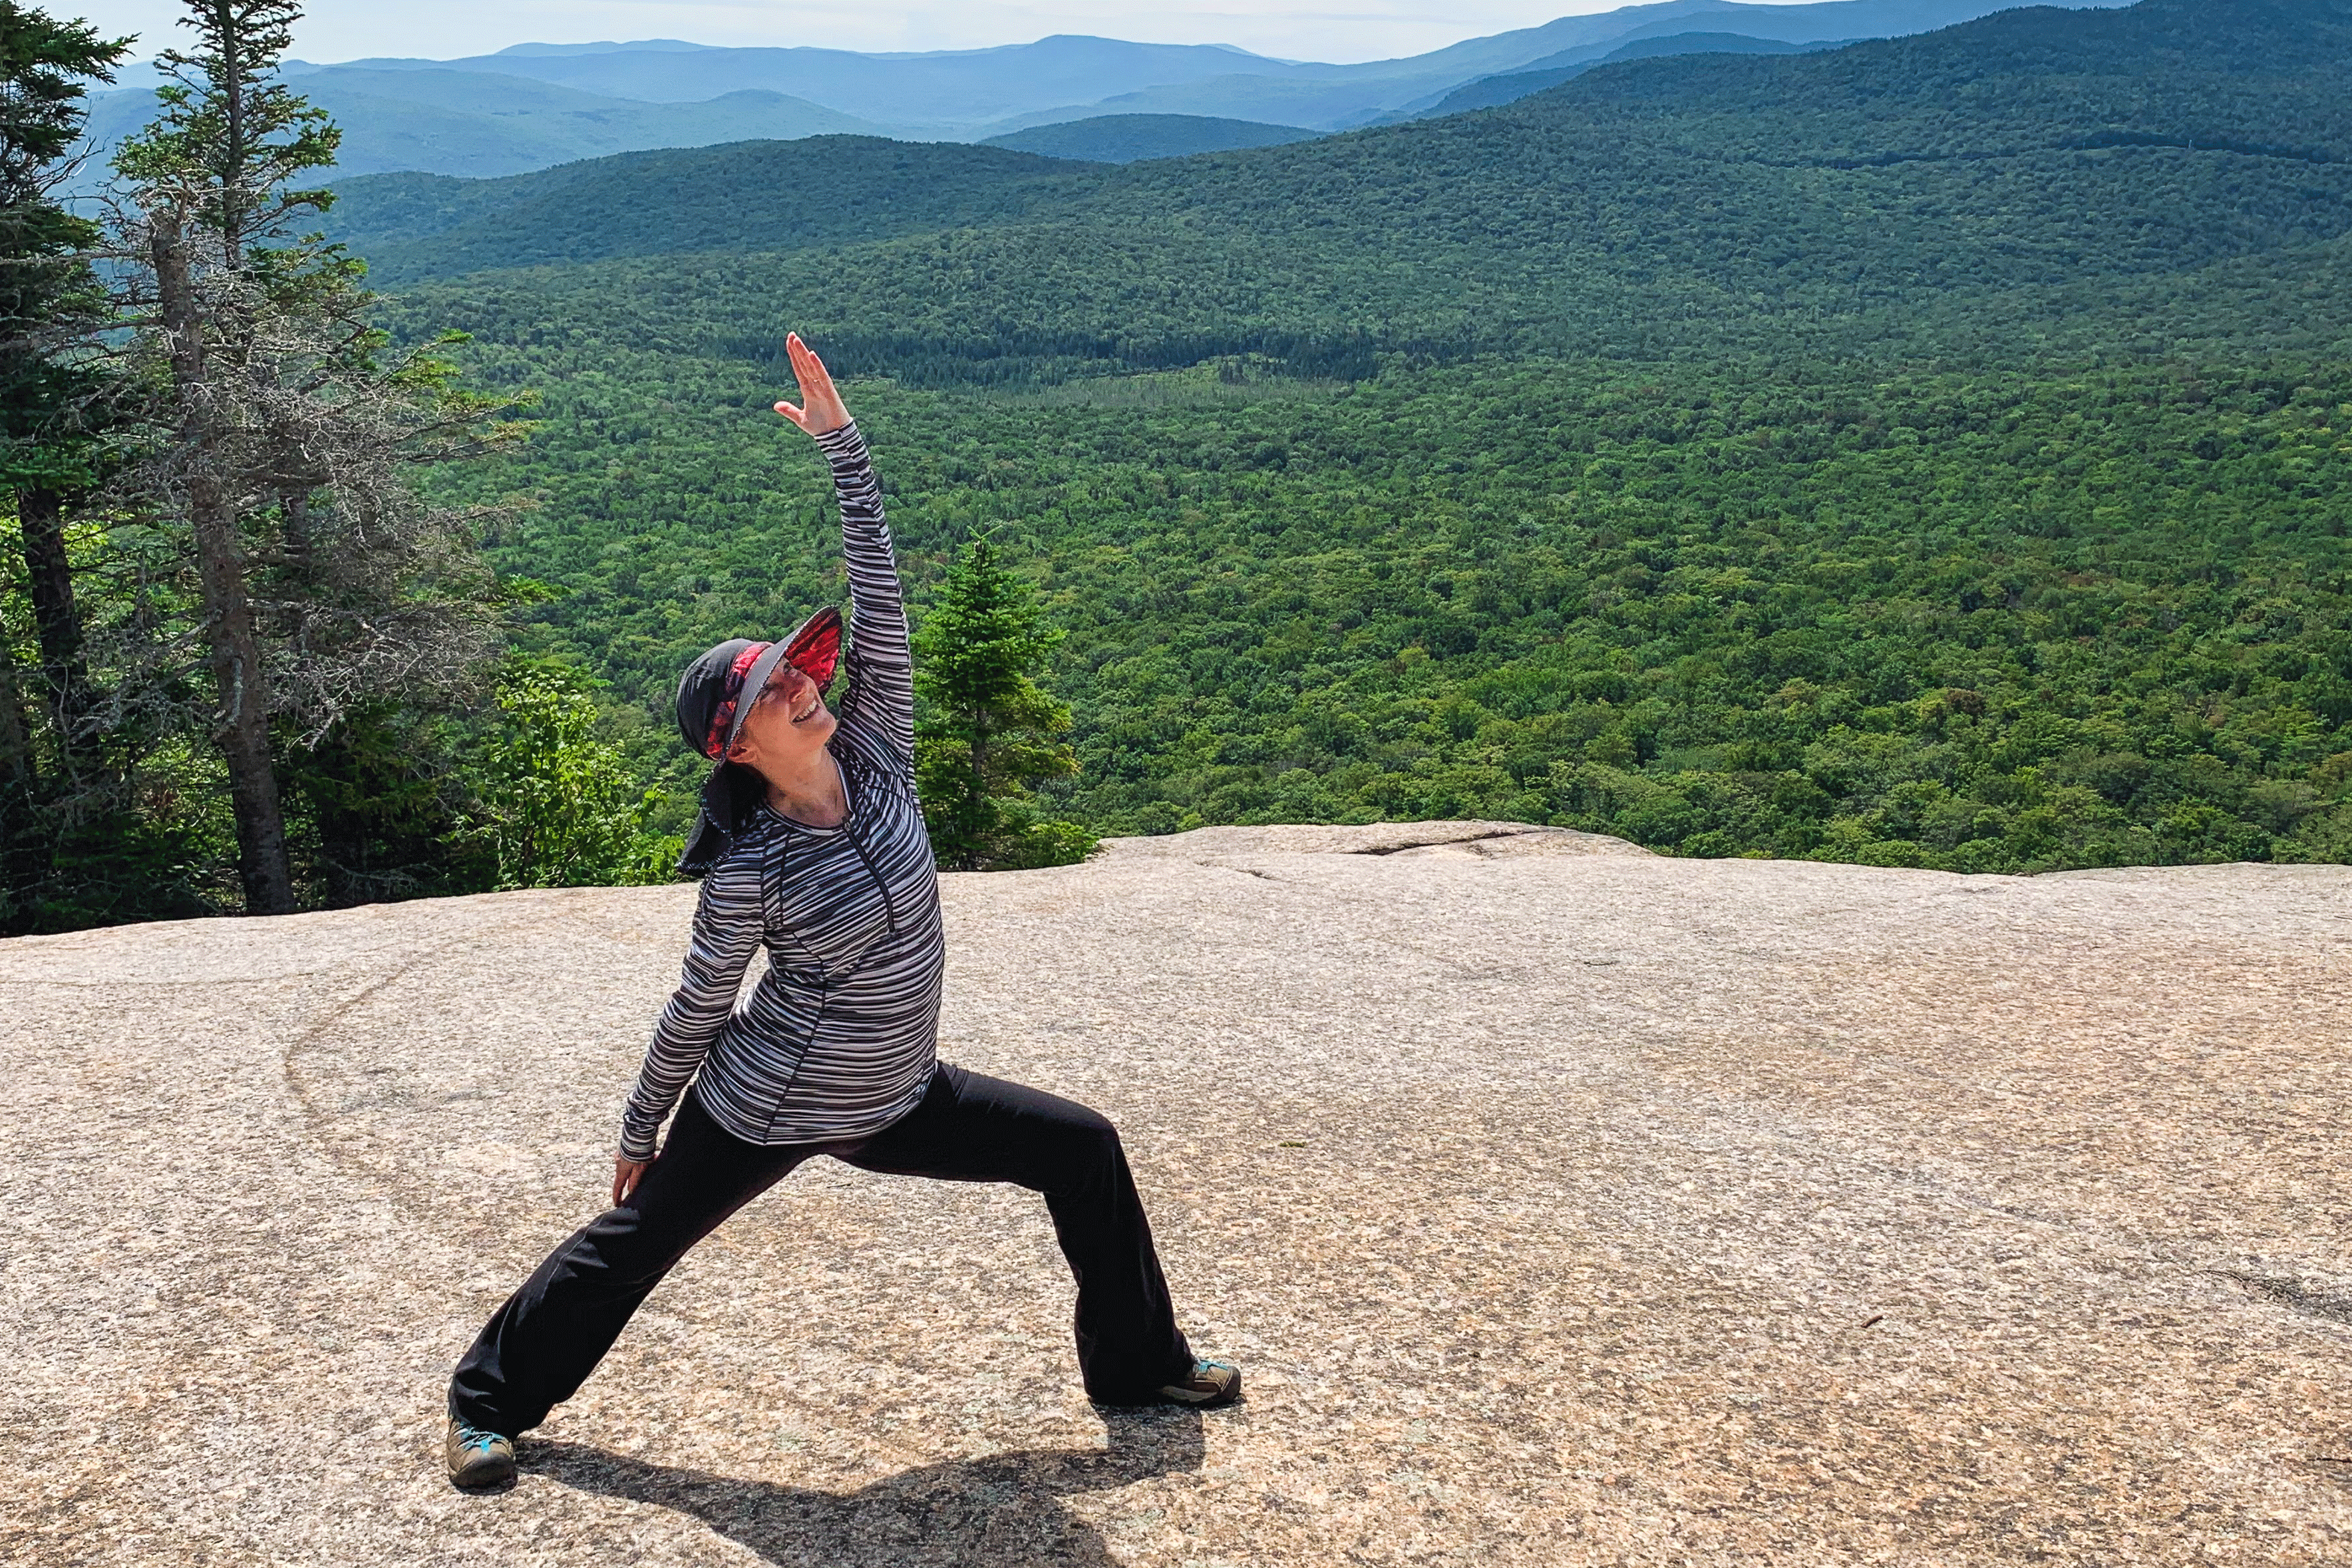 regina doing yoga in the mountains